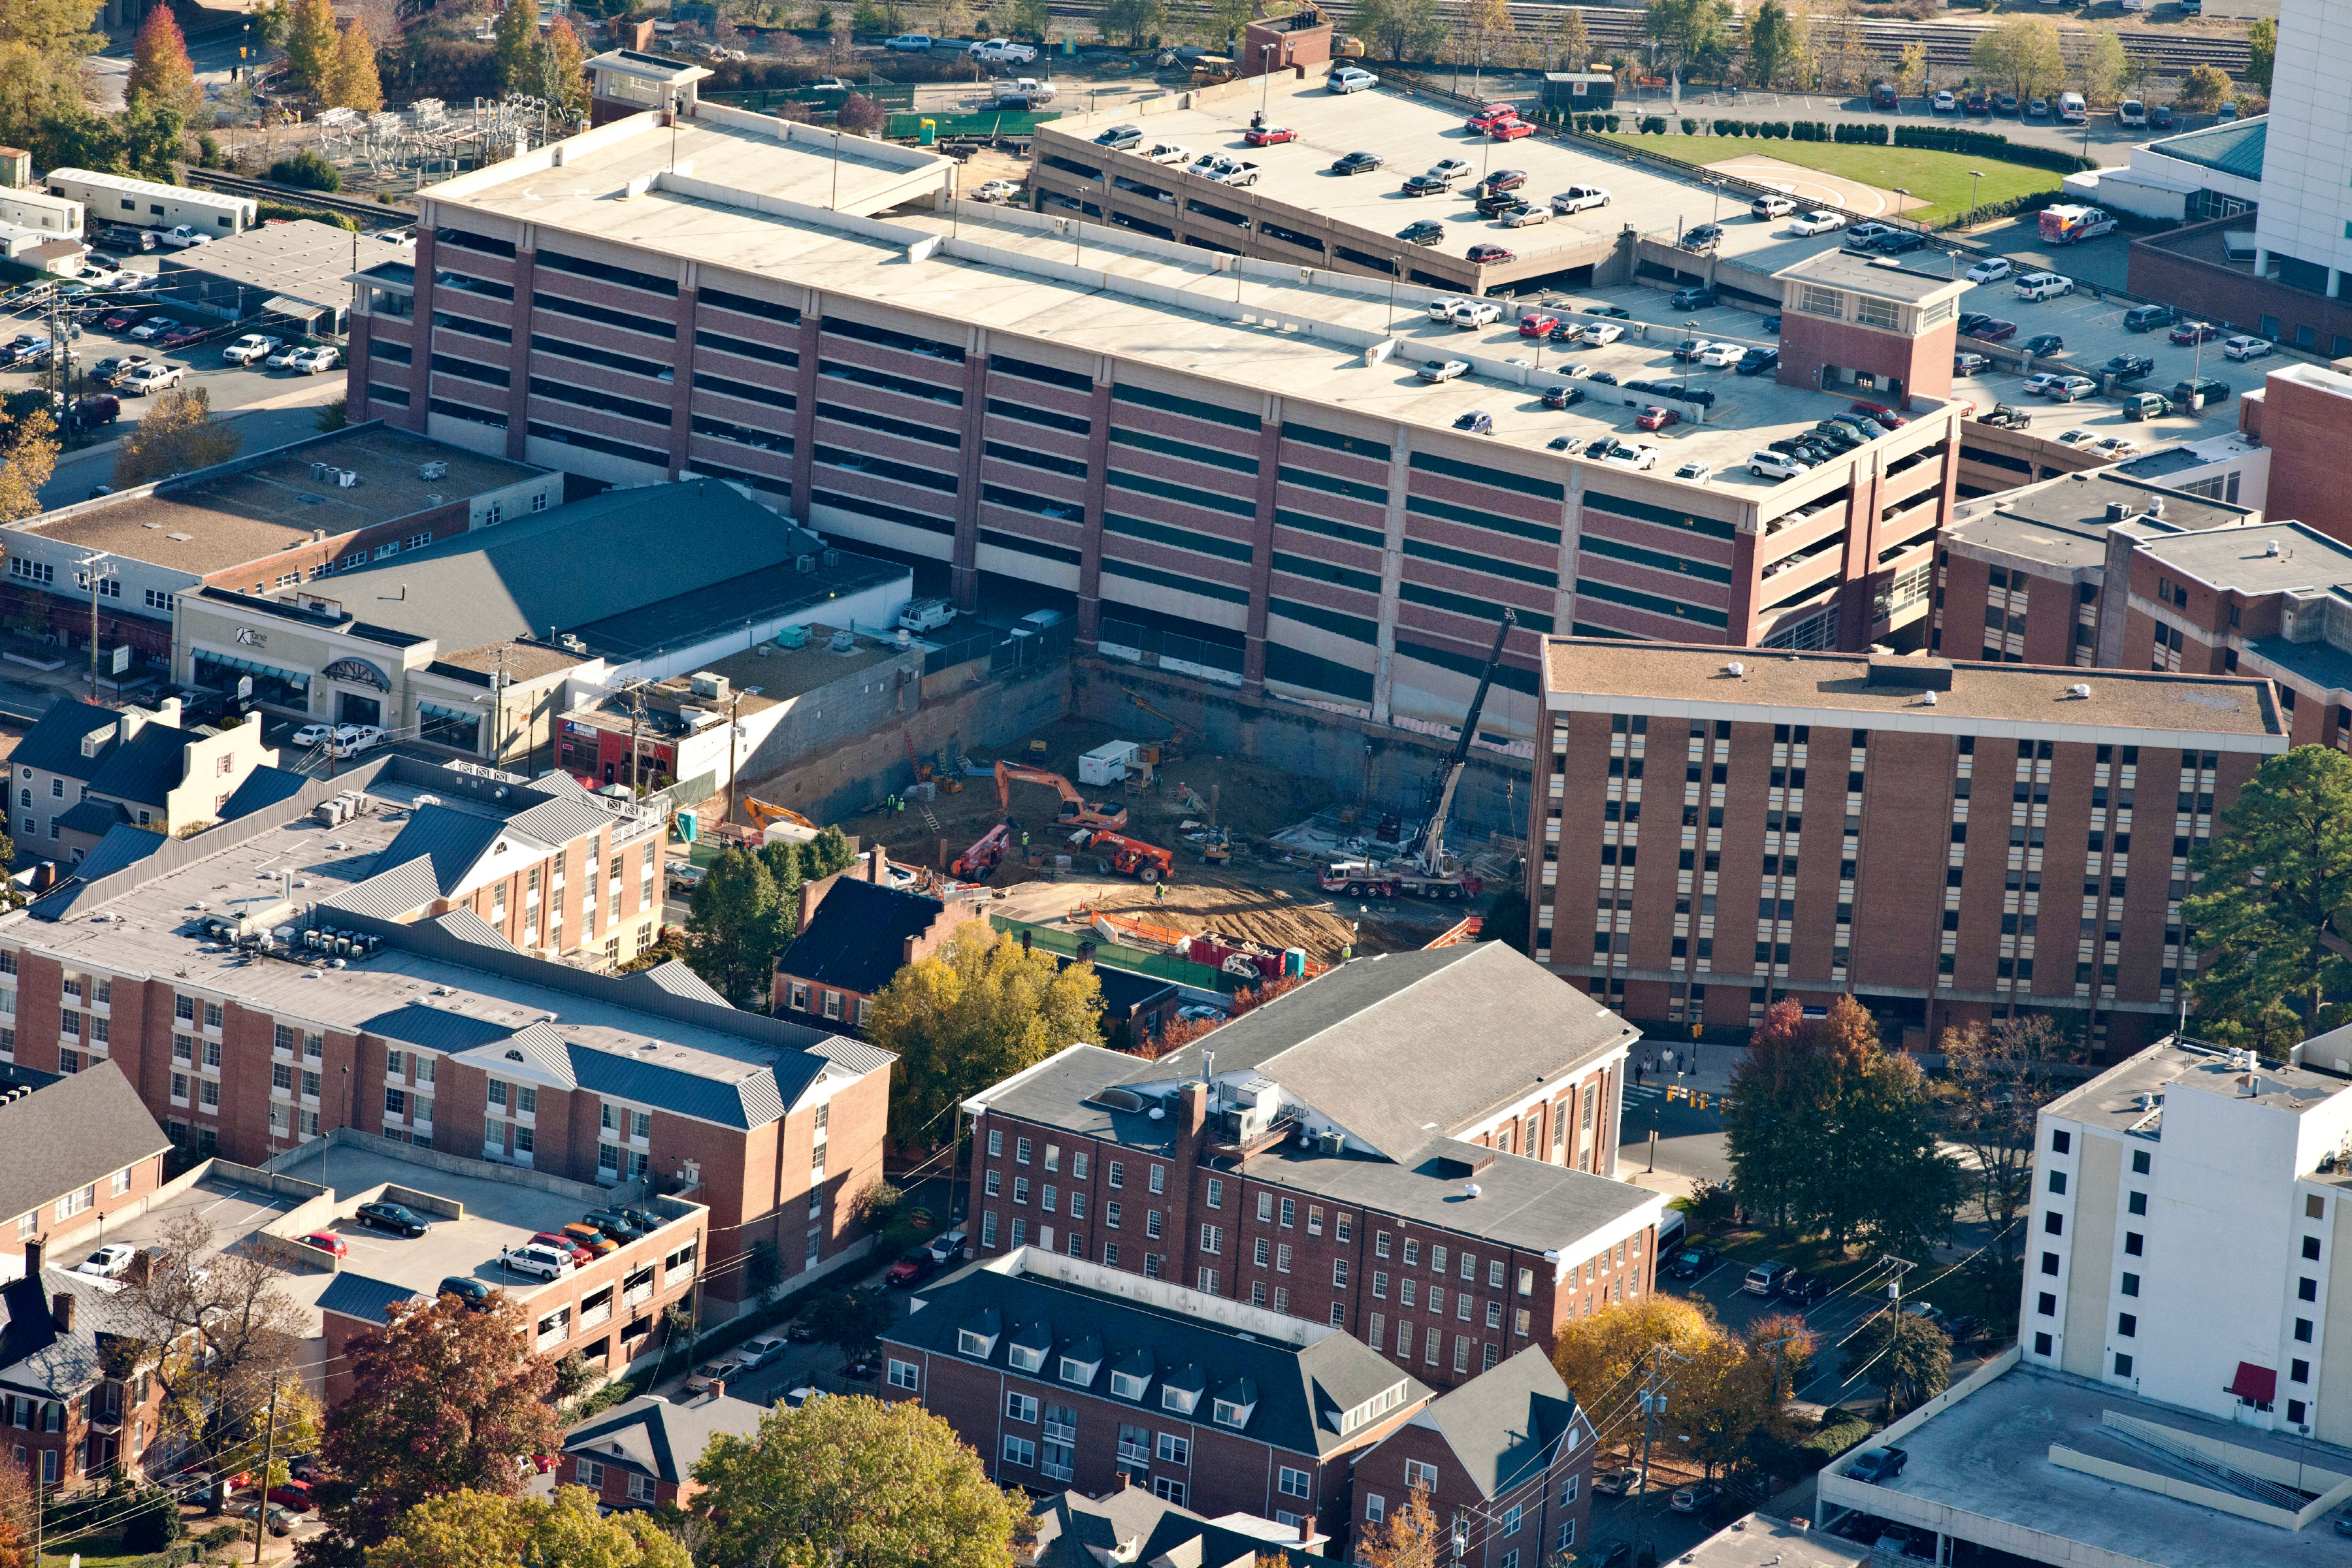 Aerial view of the construction site of the UVA Children's hospital